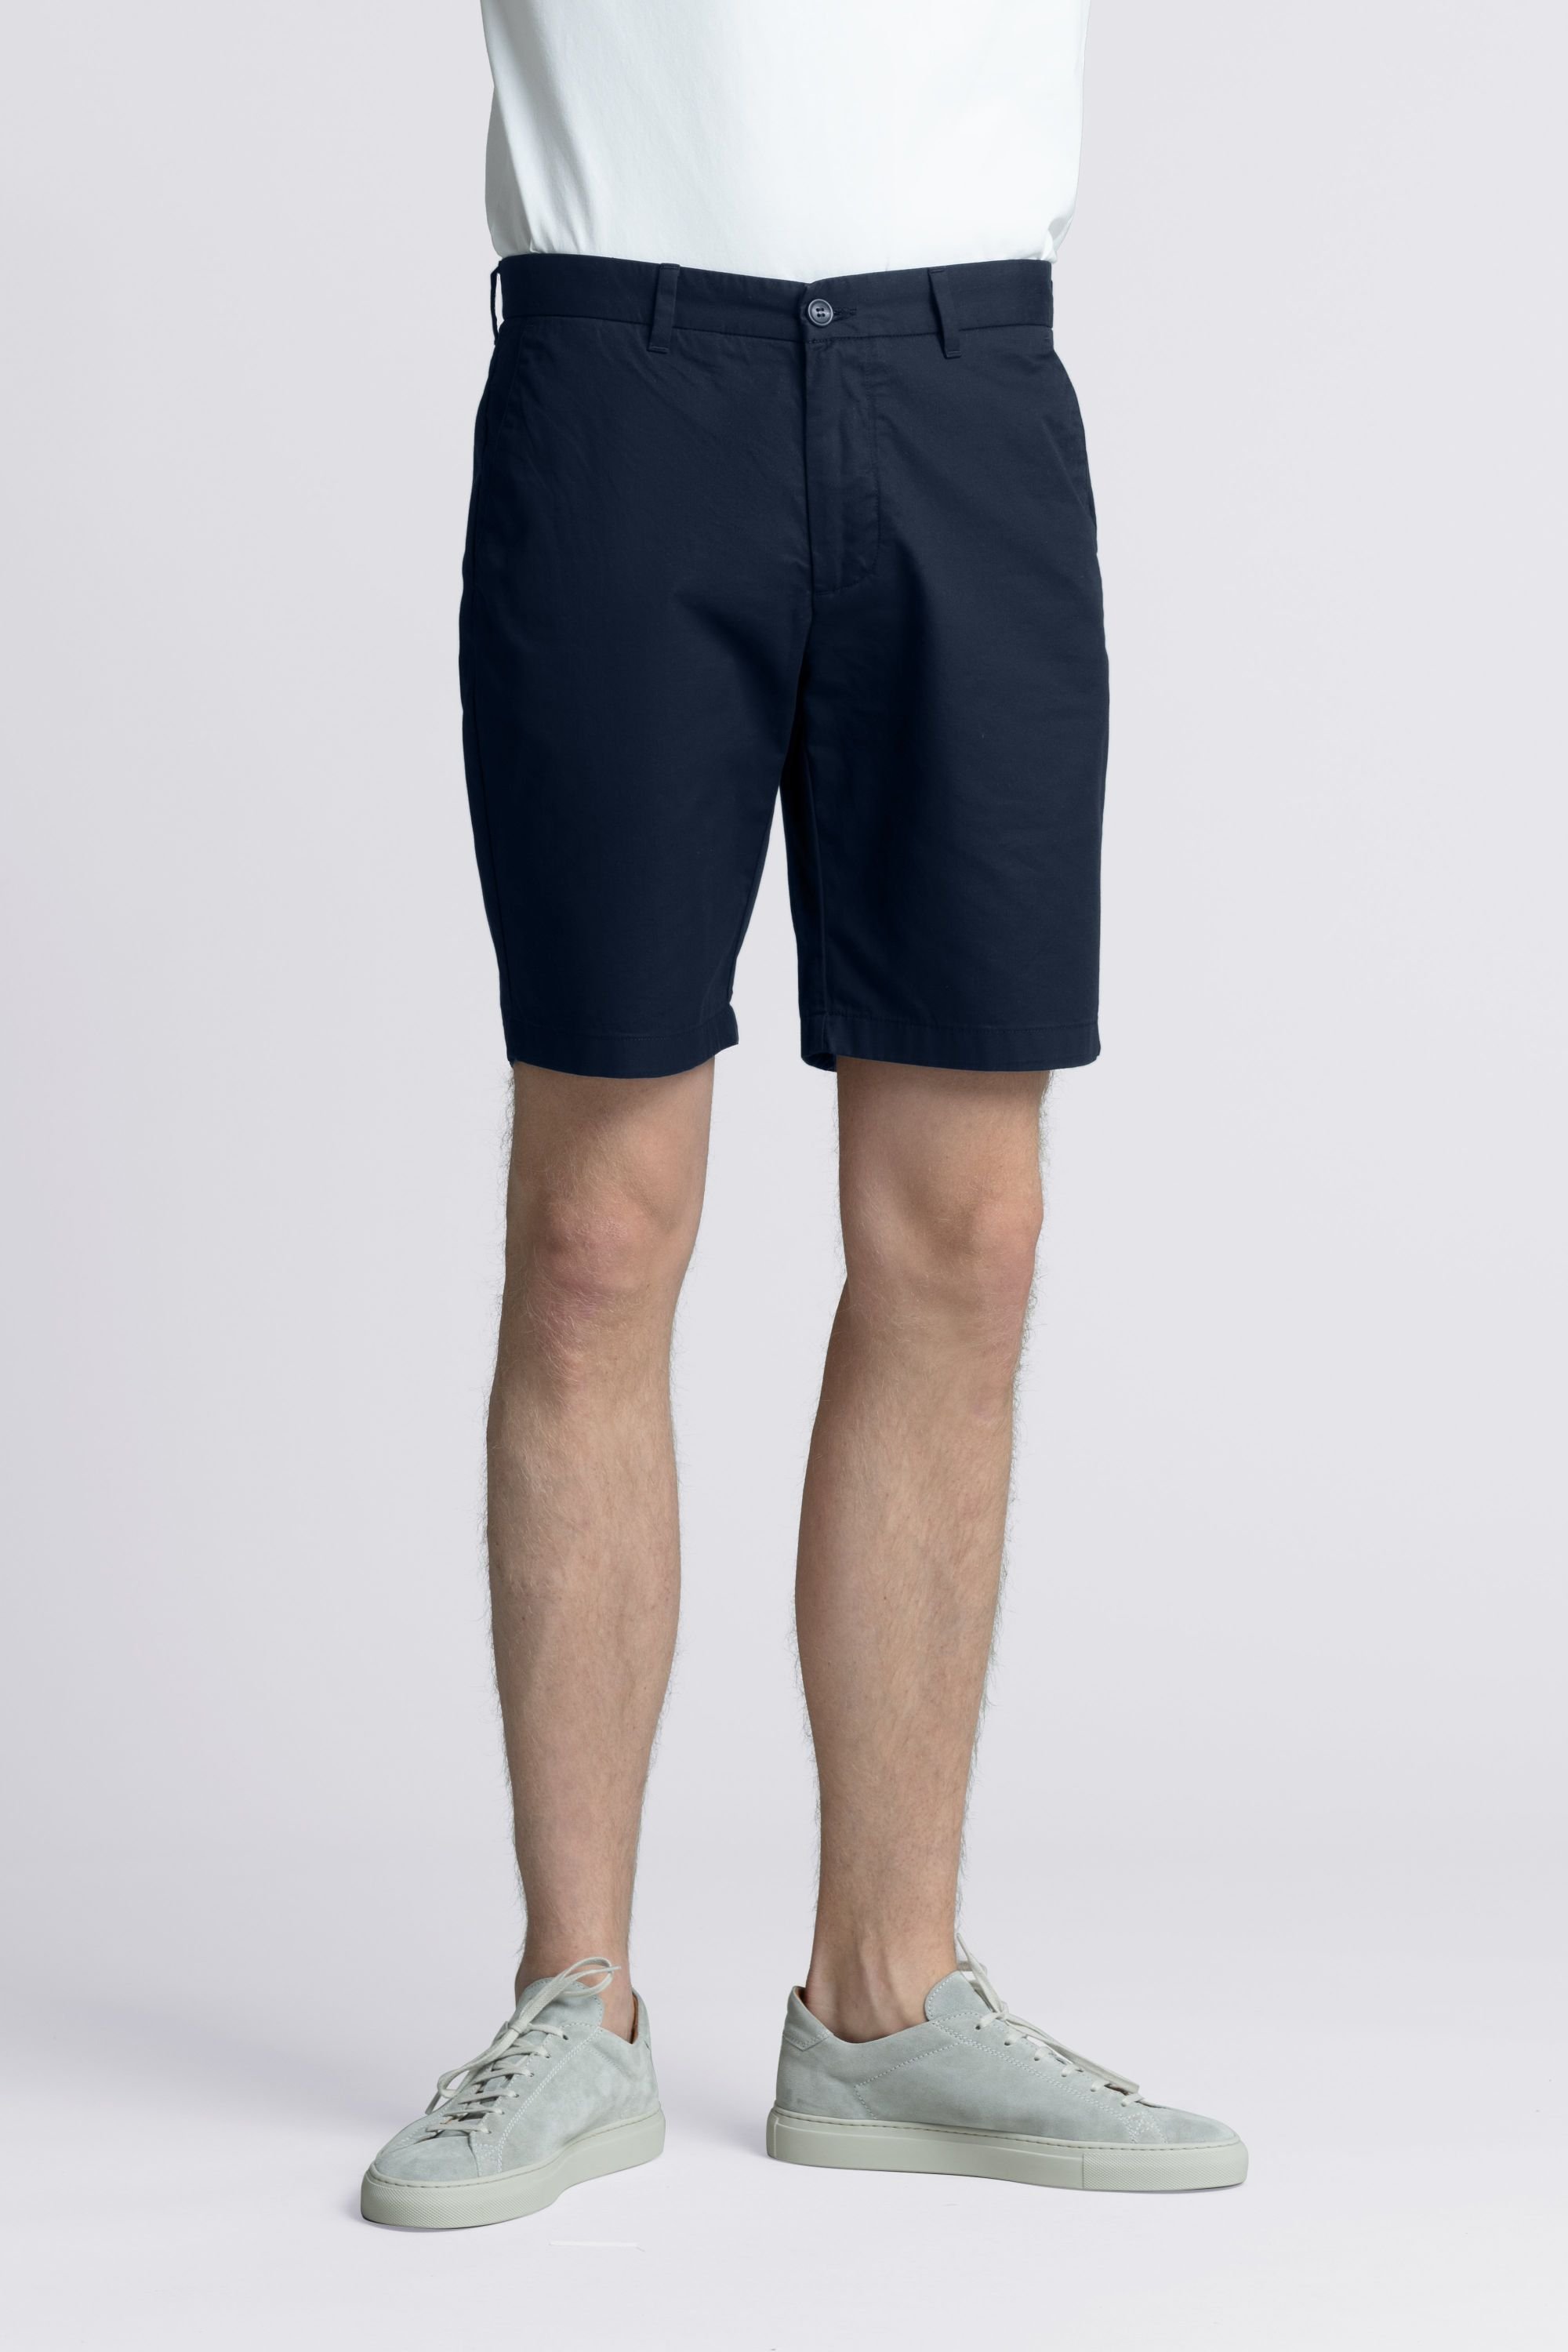 A Guide to Men’s Shorts: Spring 2022 — On Brand